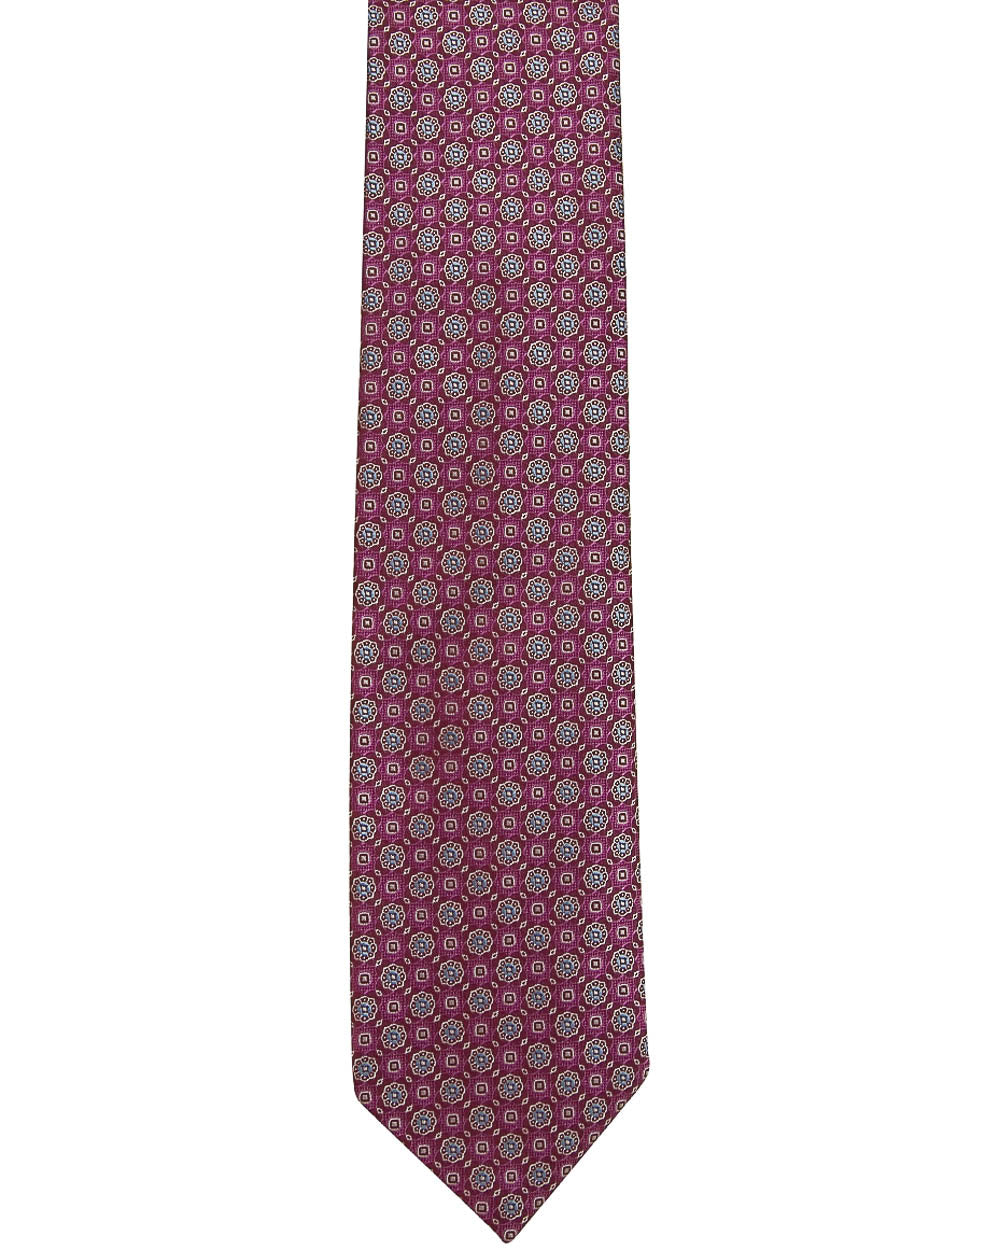 Plum with Sky Blue and White Geometric Tie